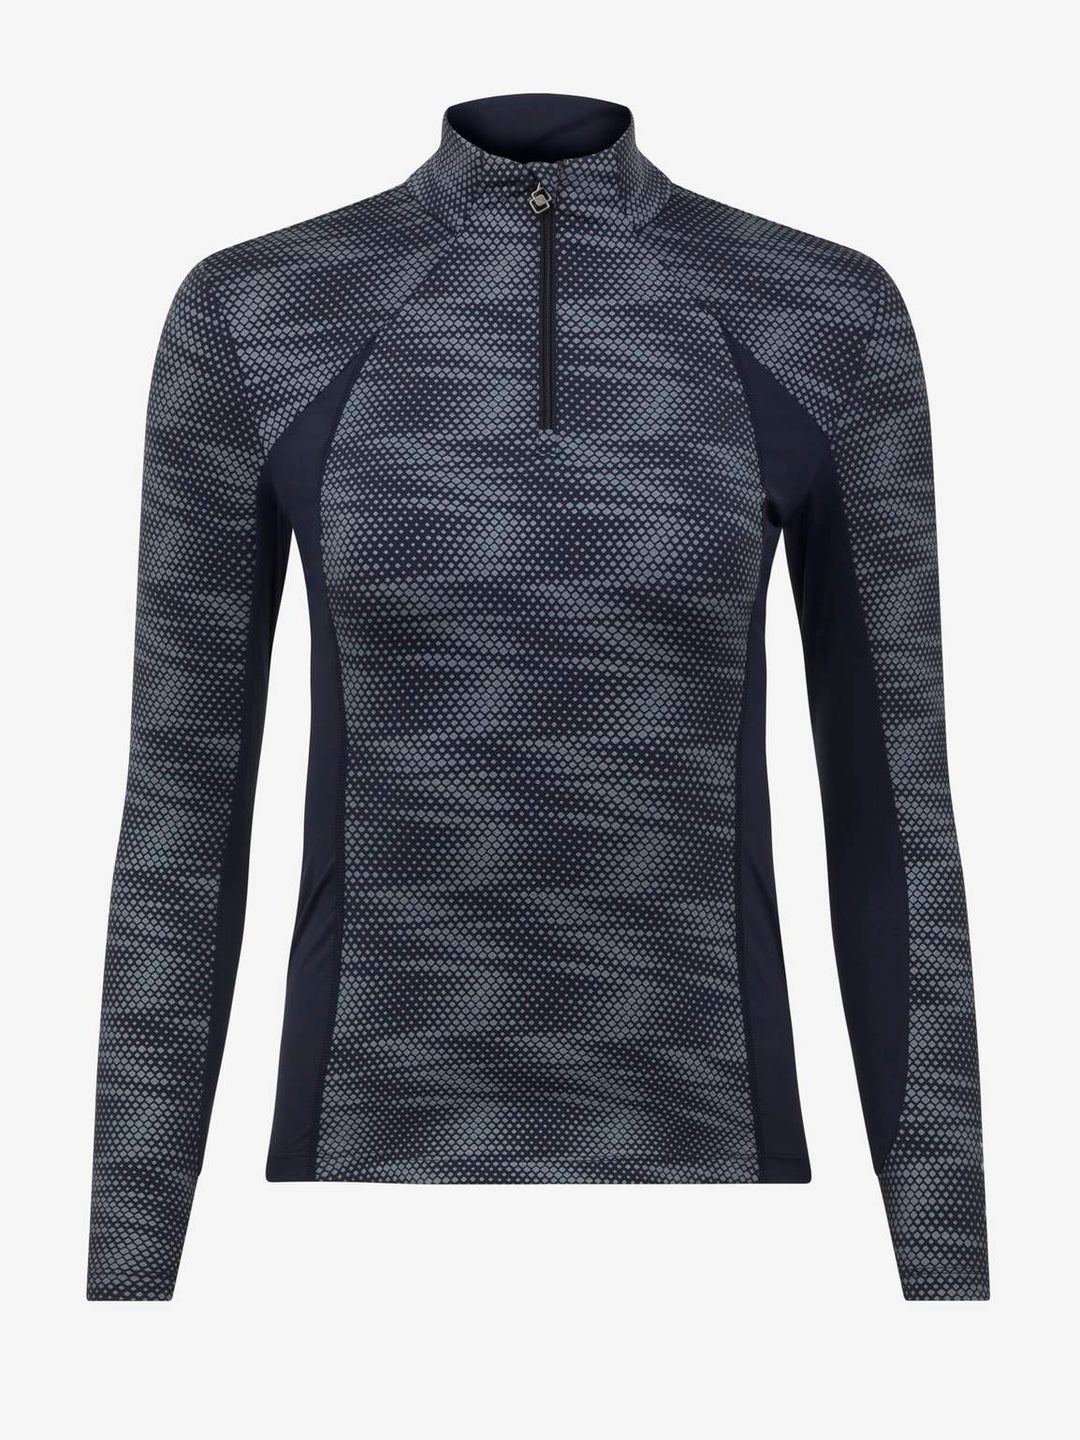 LeMieux Young Rider Eleanor Base Layer